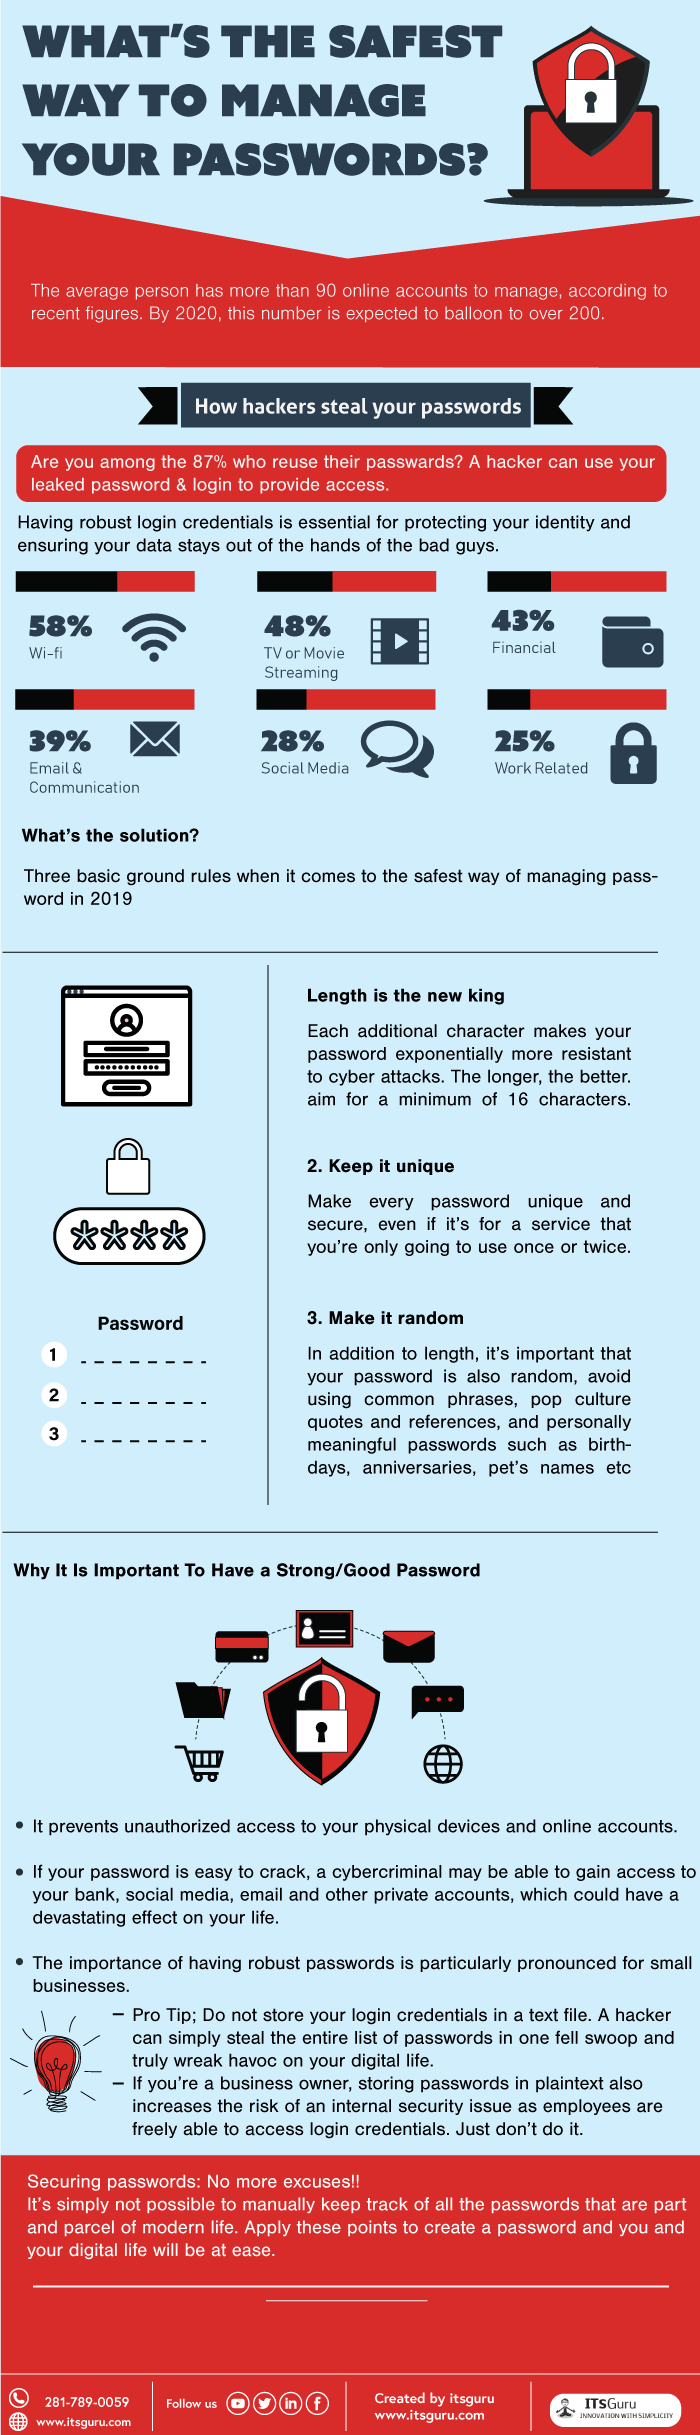 Safest Way To Manage Password